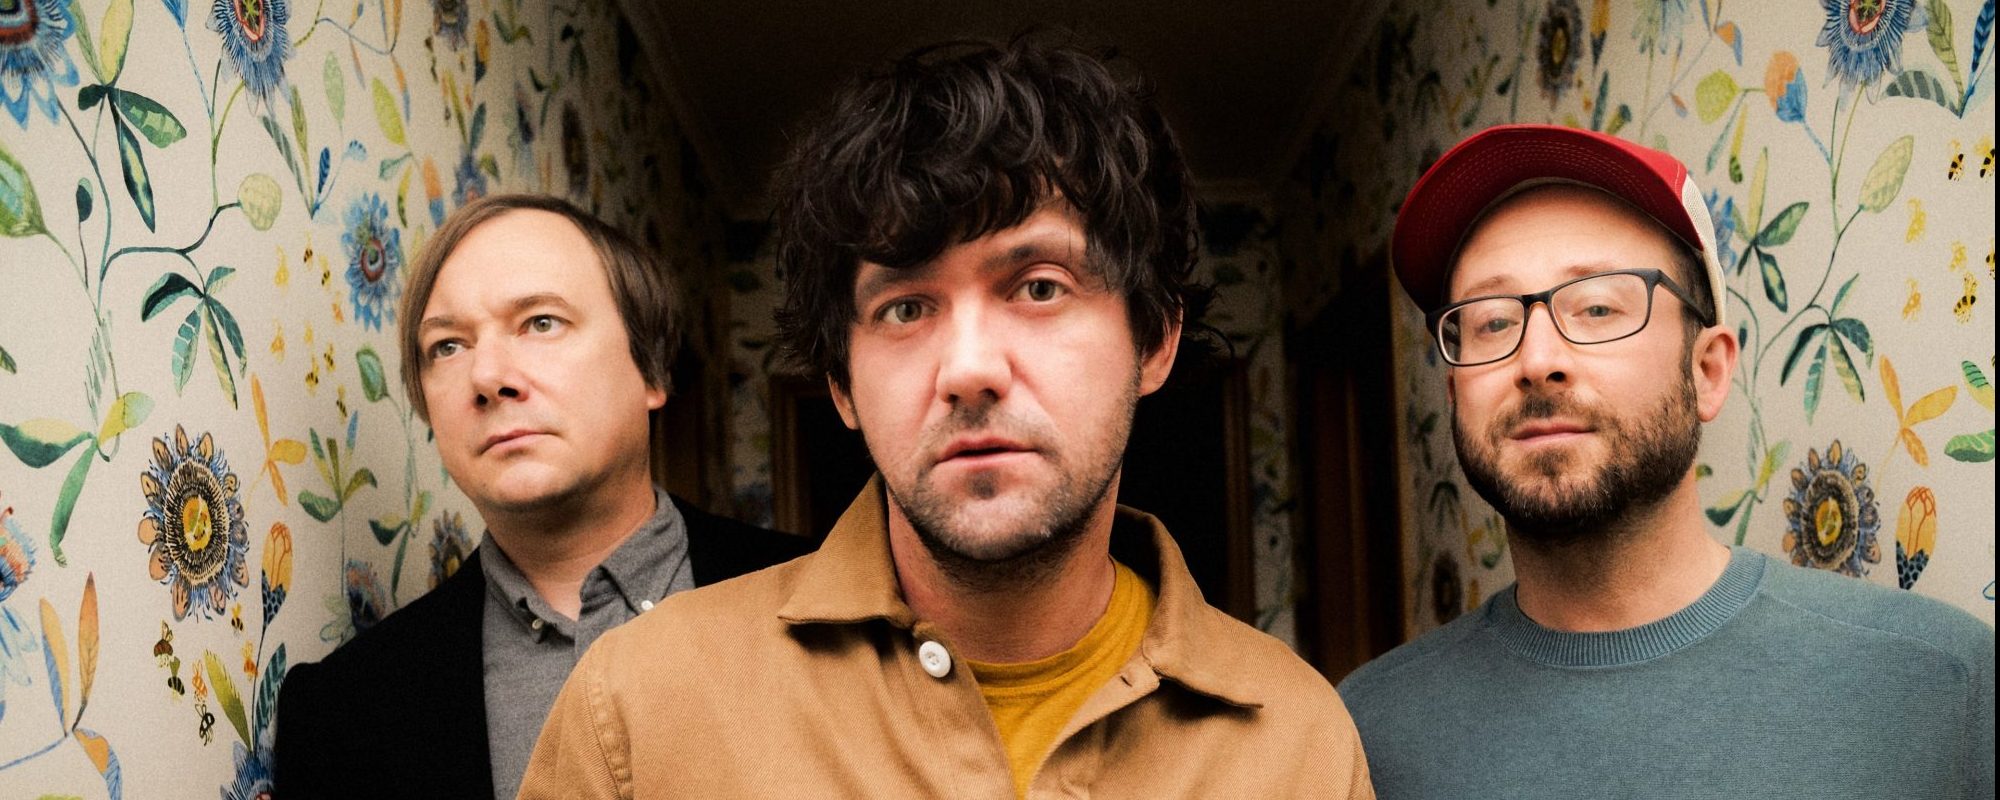 Bright Eyes’ Conor Oberst Walks Off Stage at Houston Show After Just Two Songs